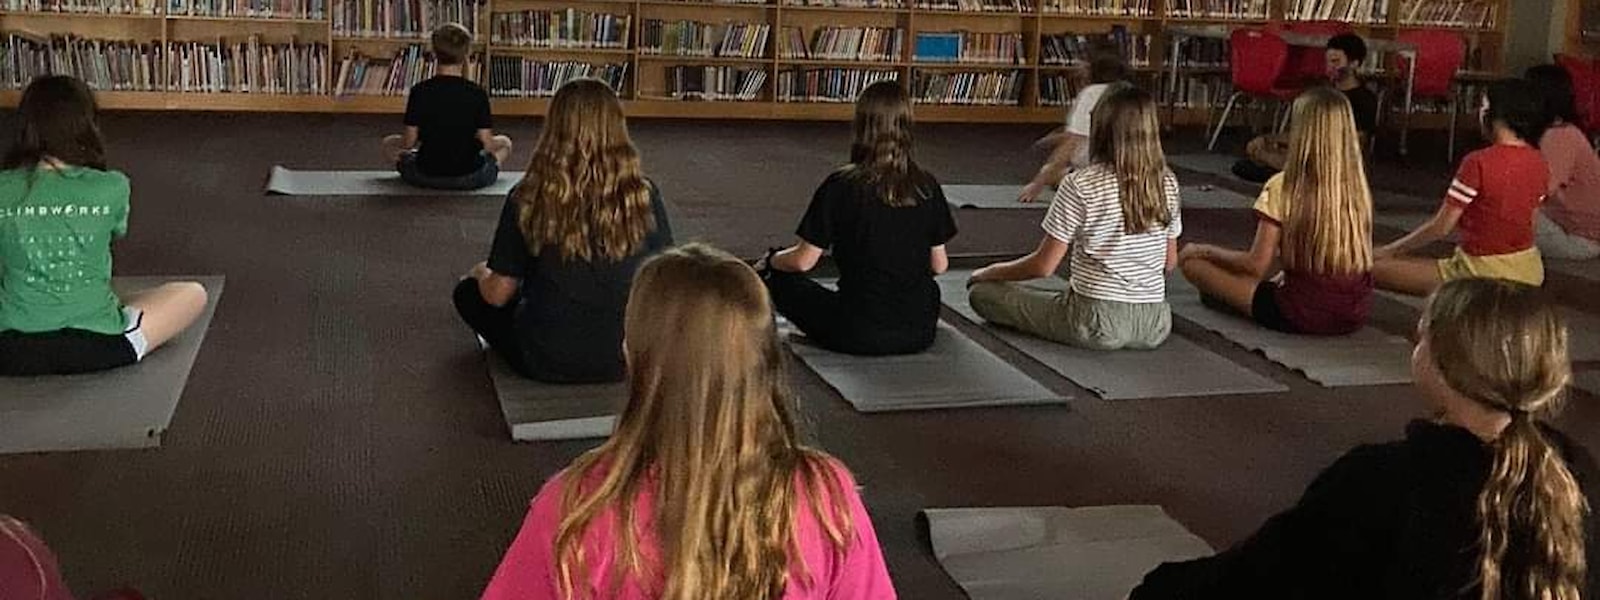 Students sitting on mats for yoga